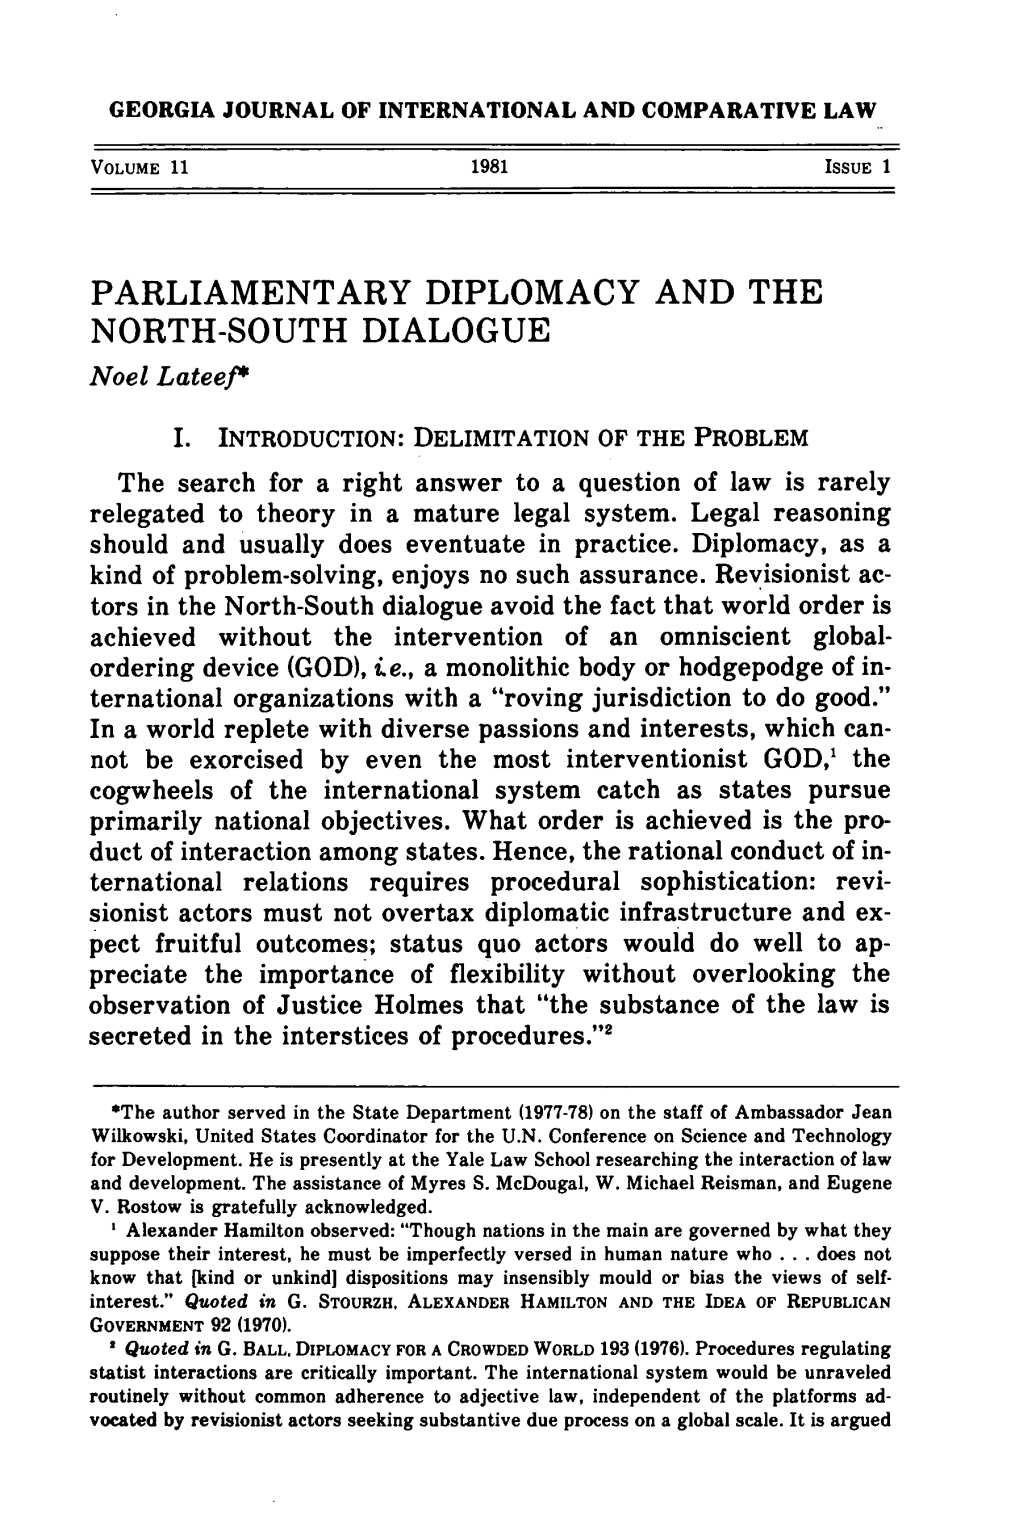 PARLIAMENTARY DIPLOMACY and the NORTH-SOUTH DIALOGUE Noel Lateef*